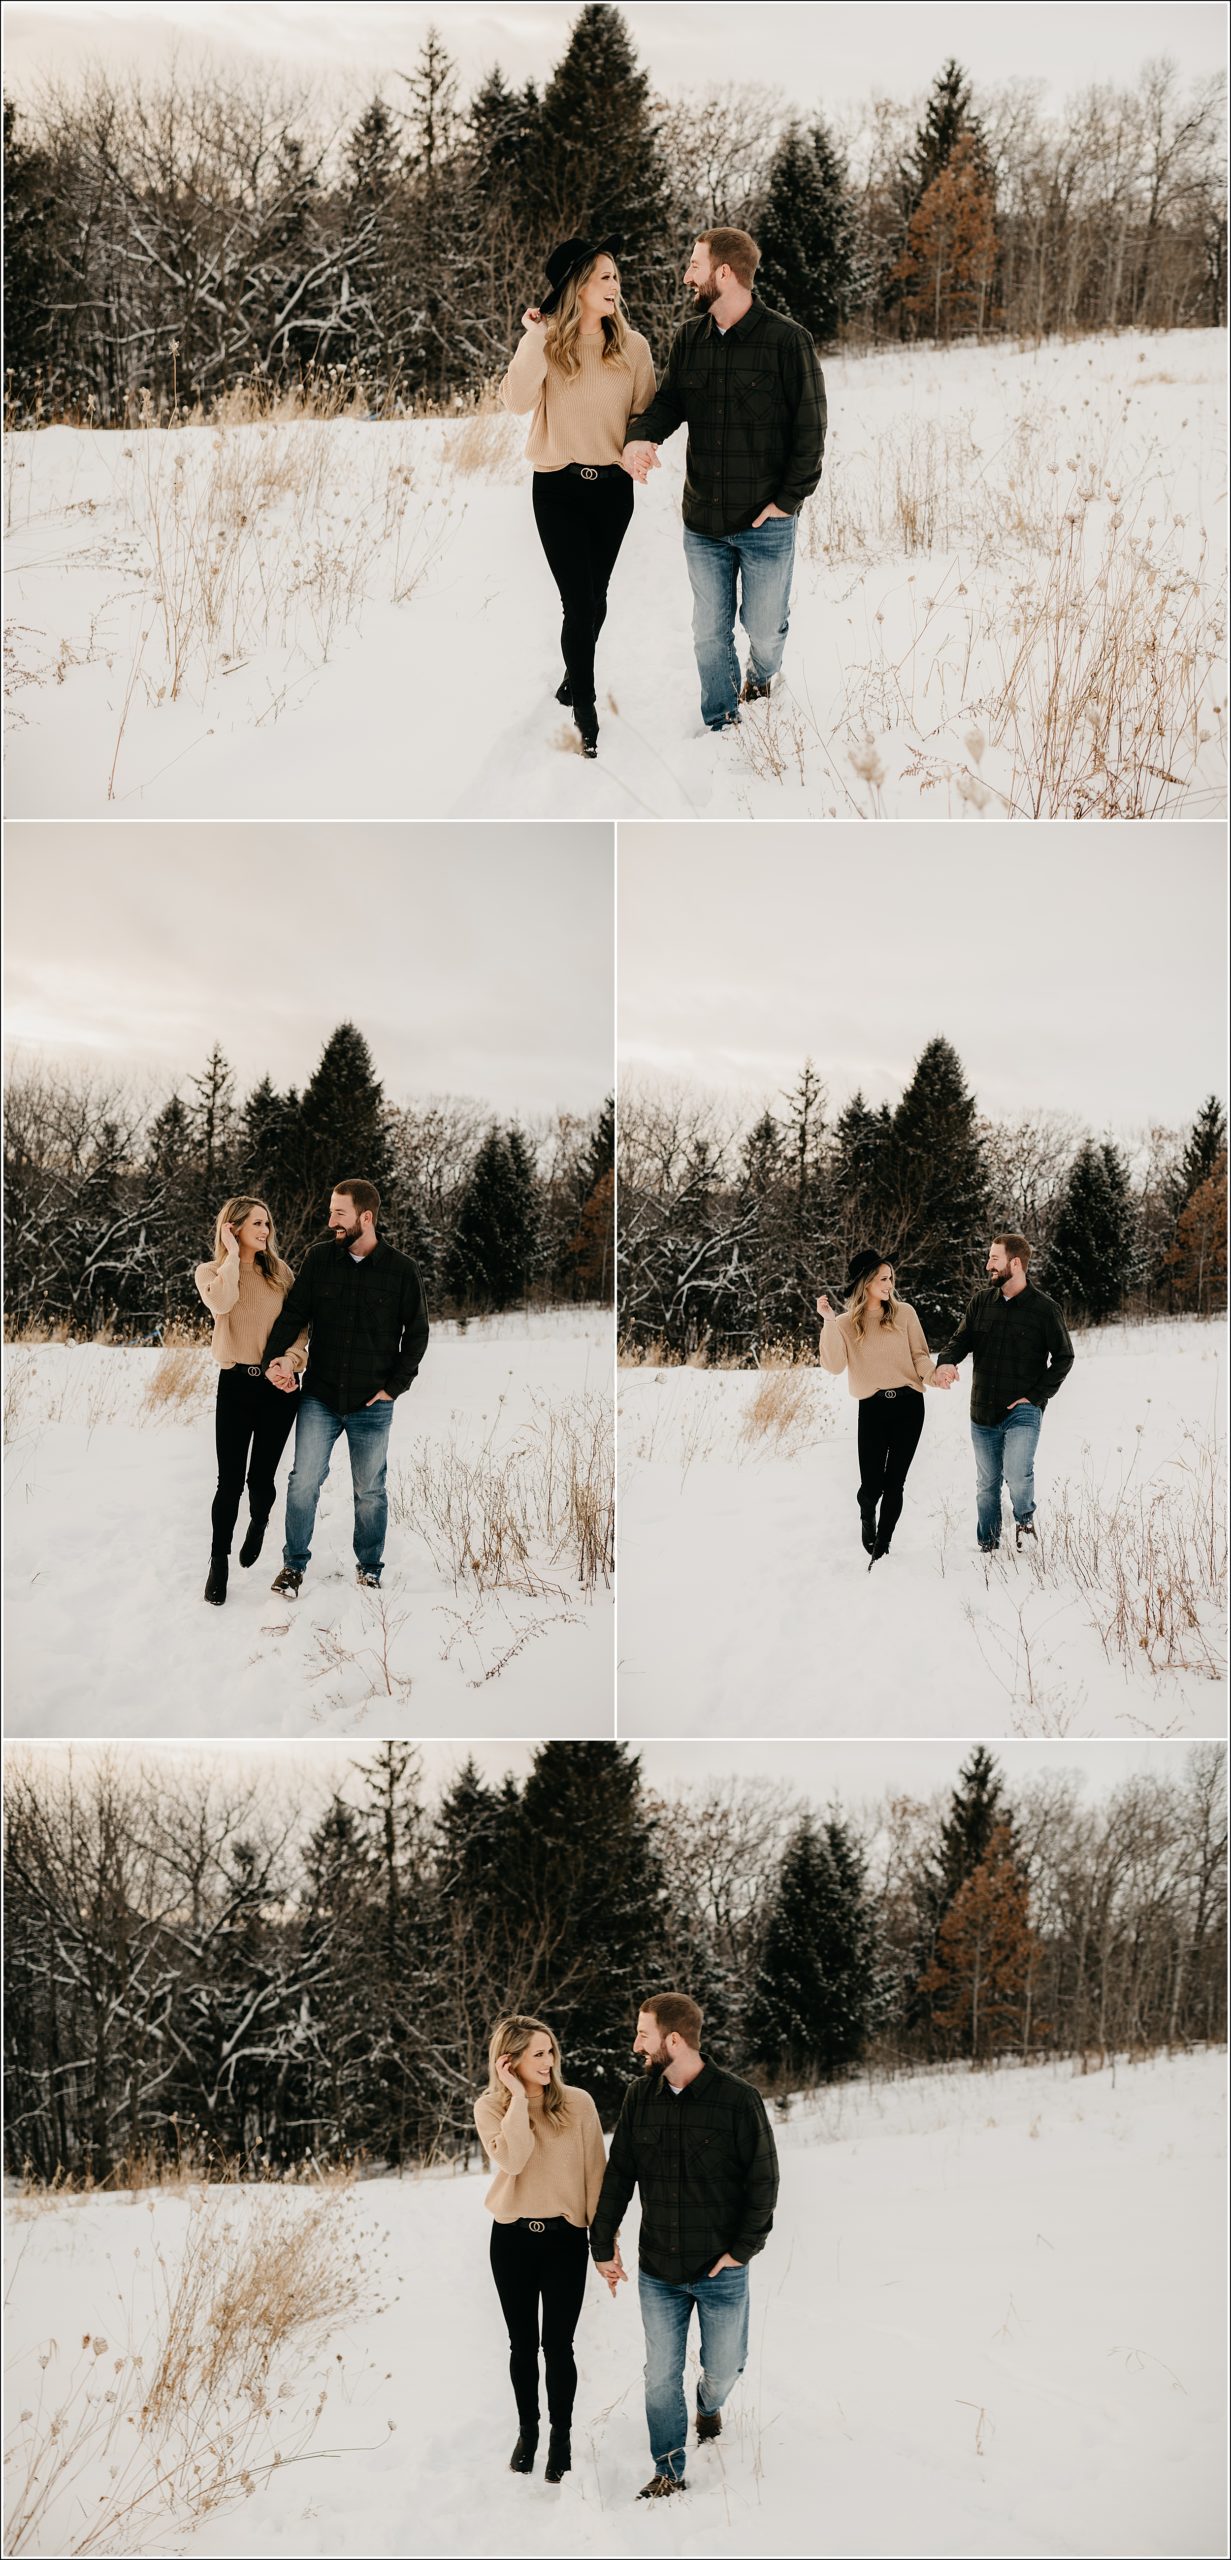 la crosse wi winter engagement photography couple is walking together in the snow with a mix of snowy trees in the background she's holding black hat and looking at each other bumping into each other